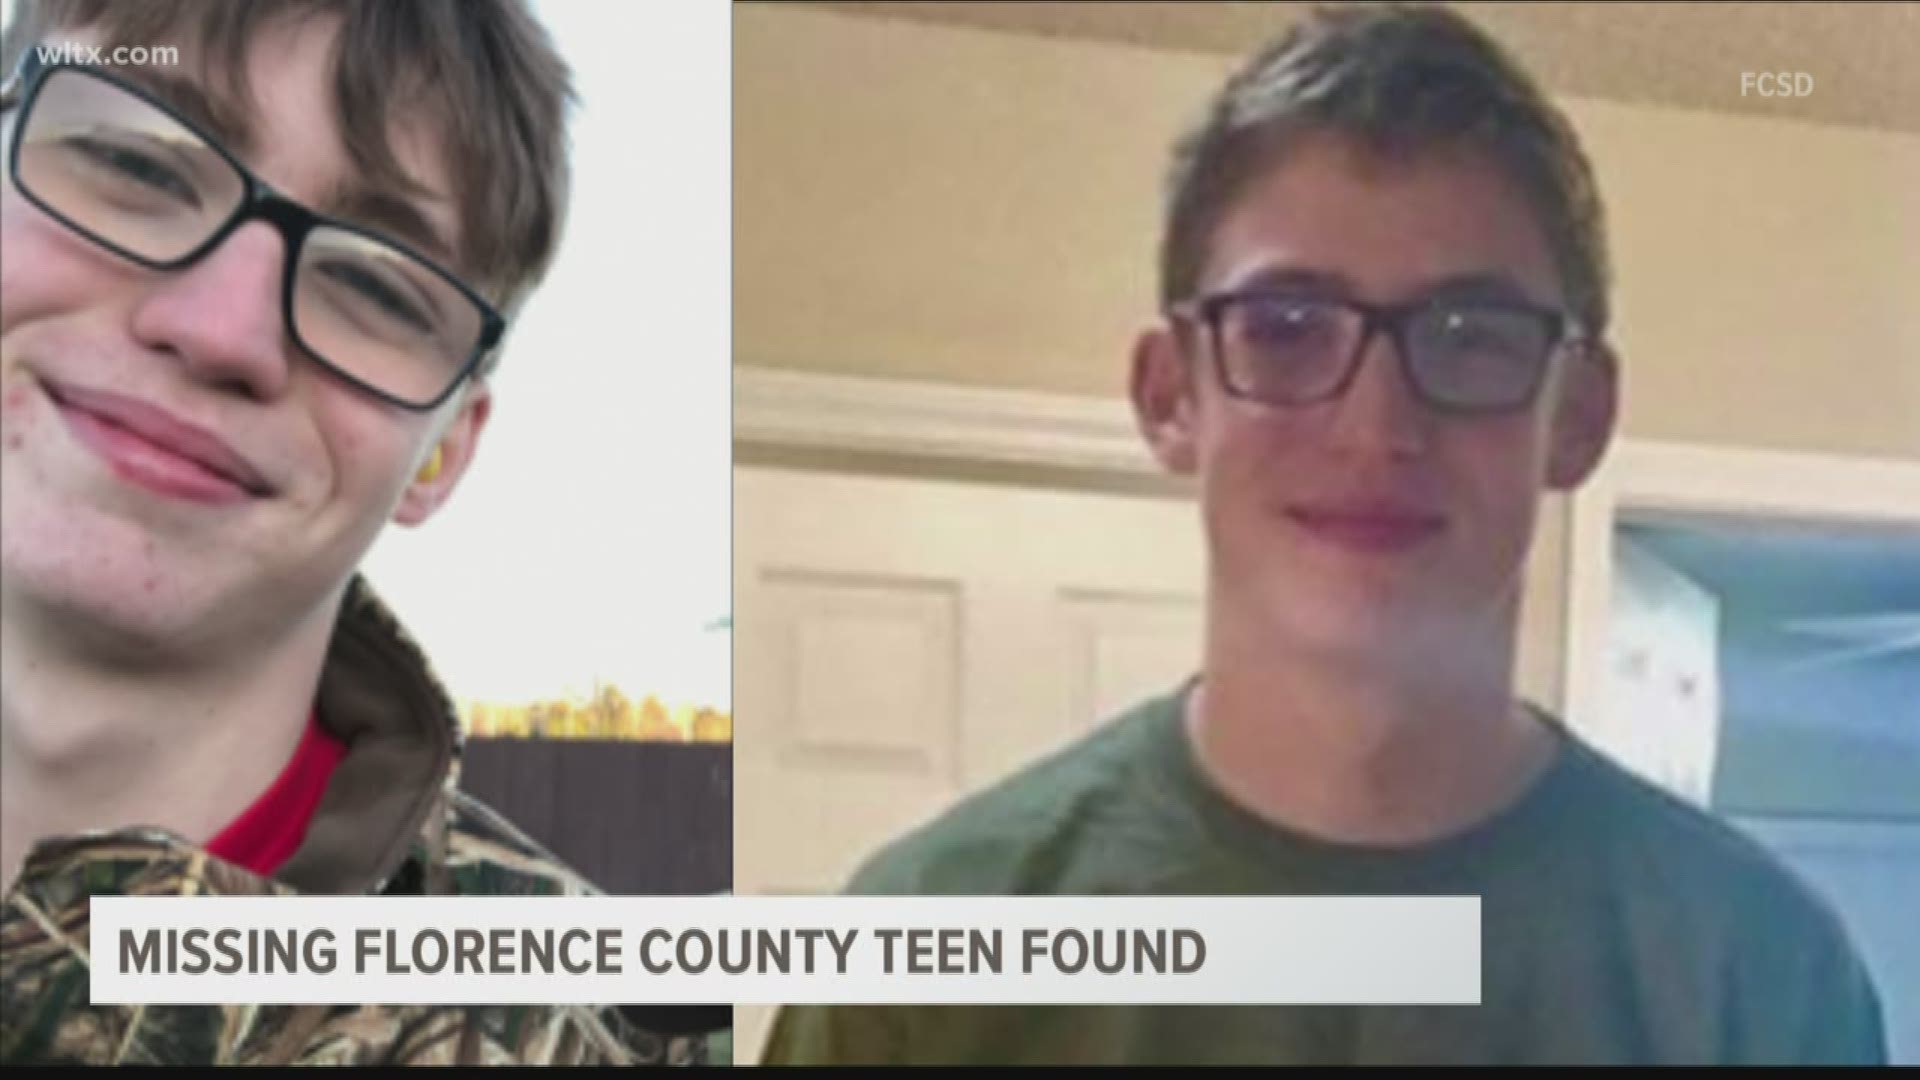 Florence County deputies say 15-year-old William Bruene was found safe and returned home on Saturday, Feb. 15.